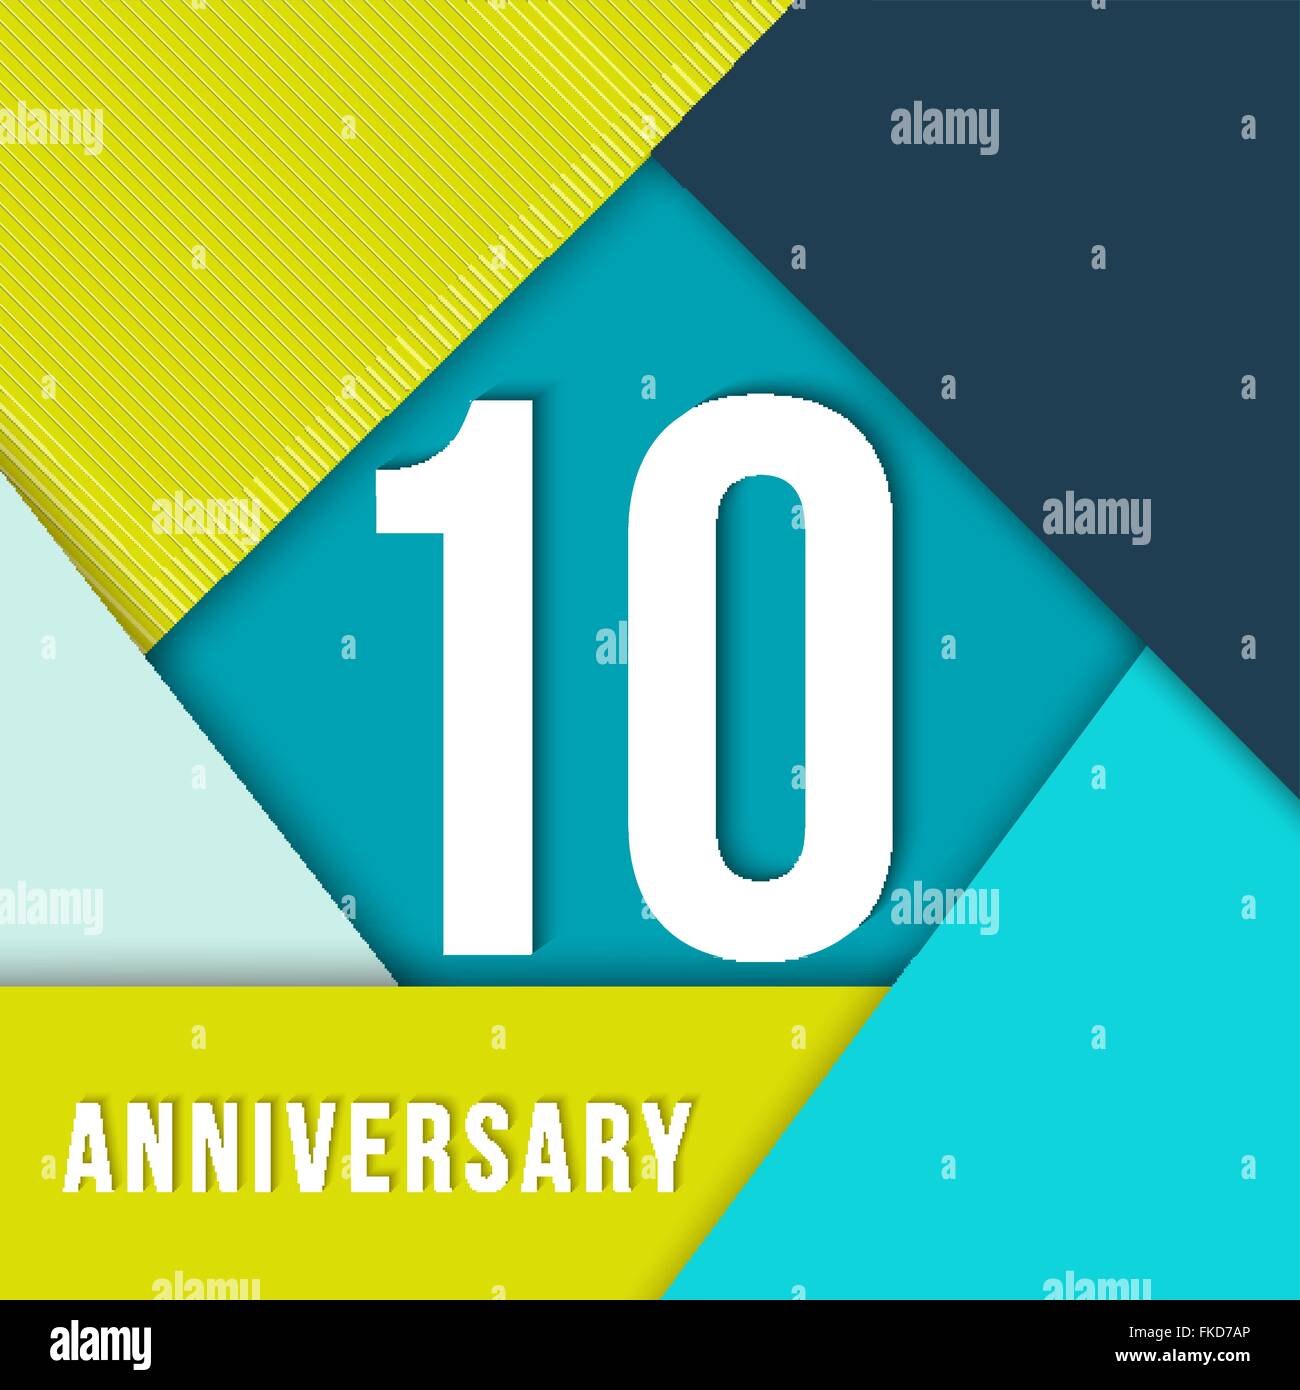 10 ten year anniversary colorful template with number, text label and geometry shapes in flat material design style. Stock Vector